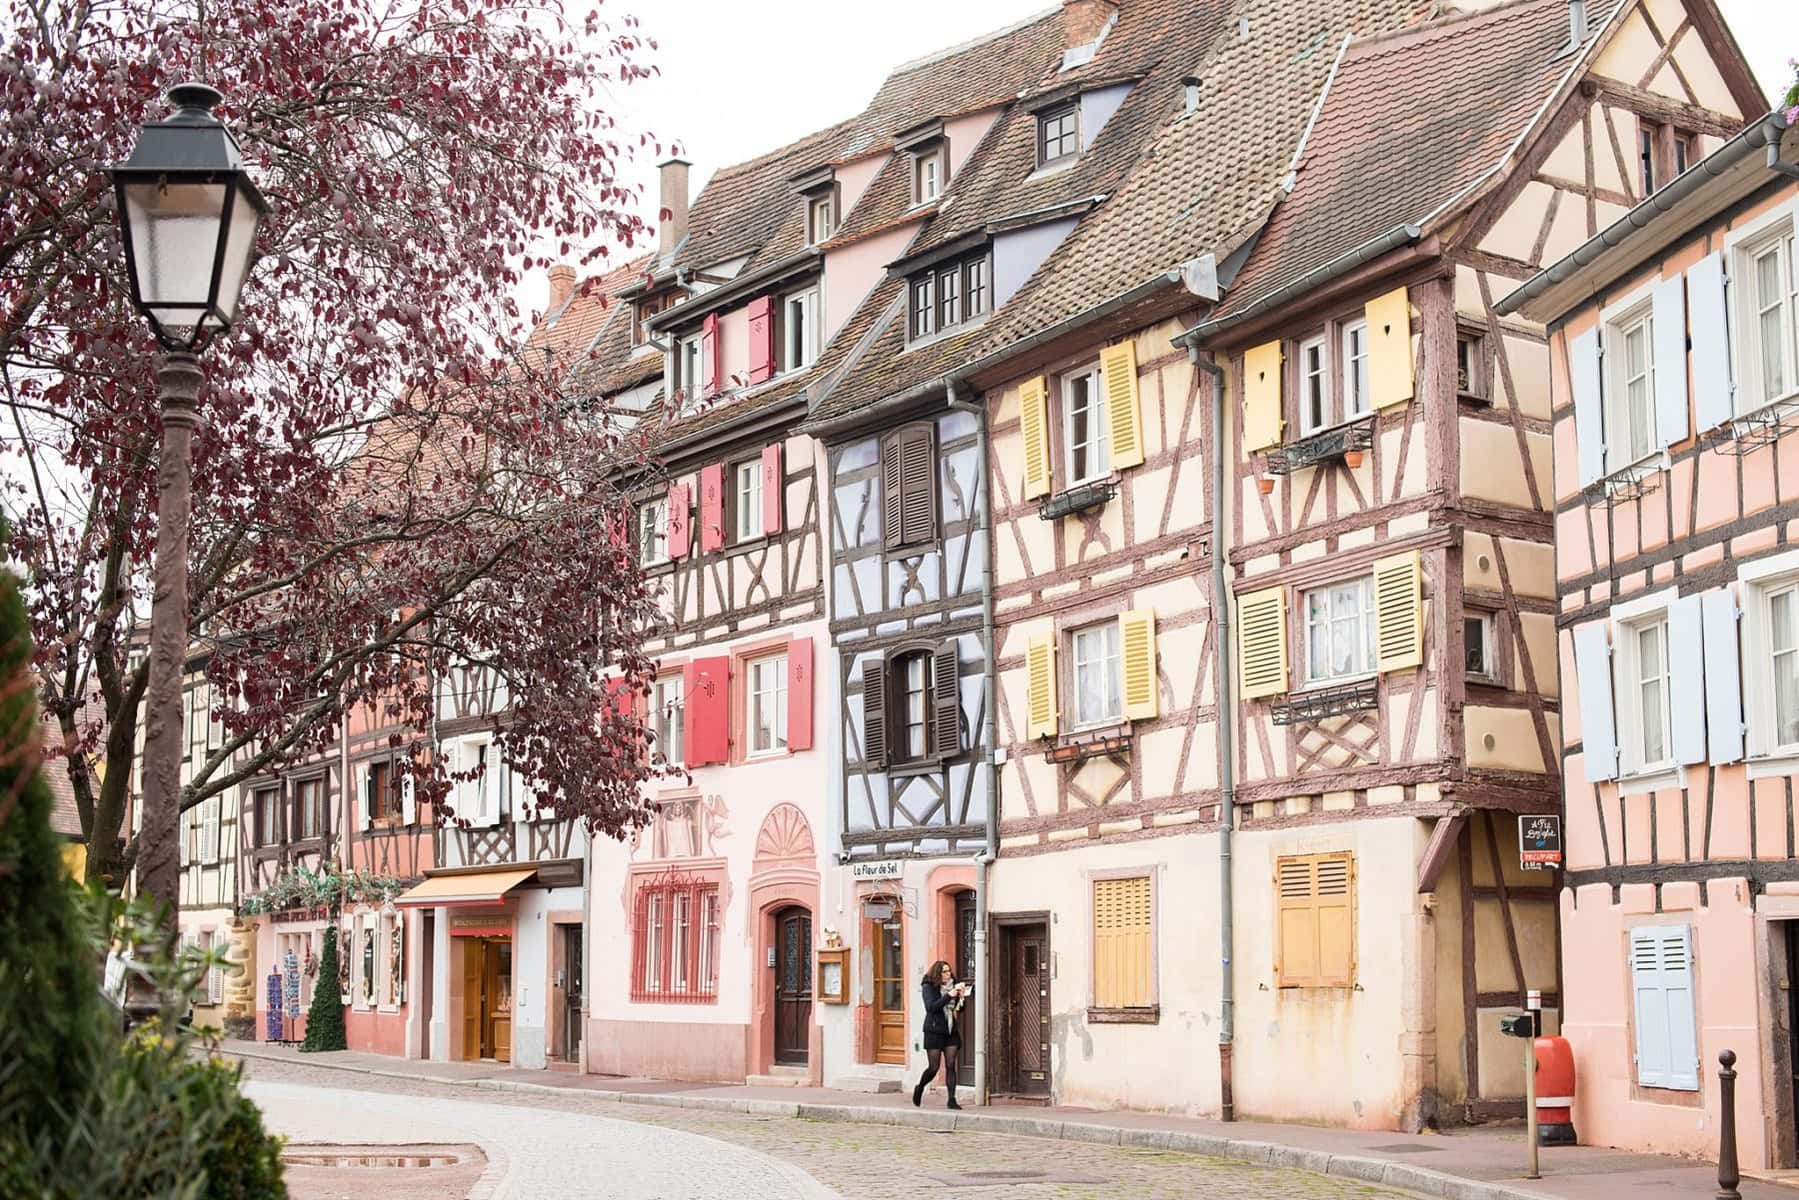 15 Pictures of Colmar, France That Will Urge You to Book a Trip Immediately